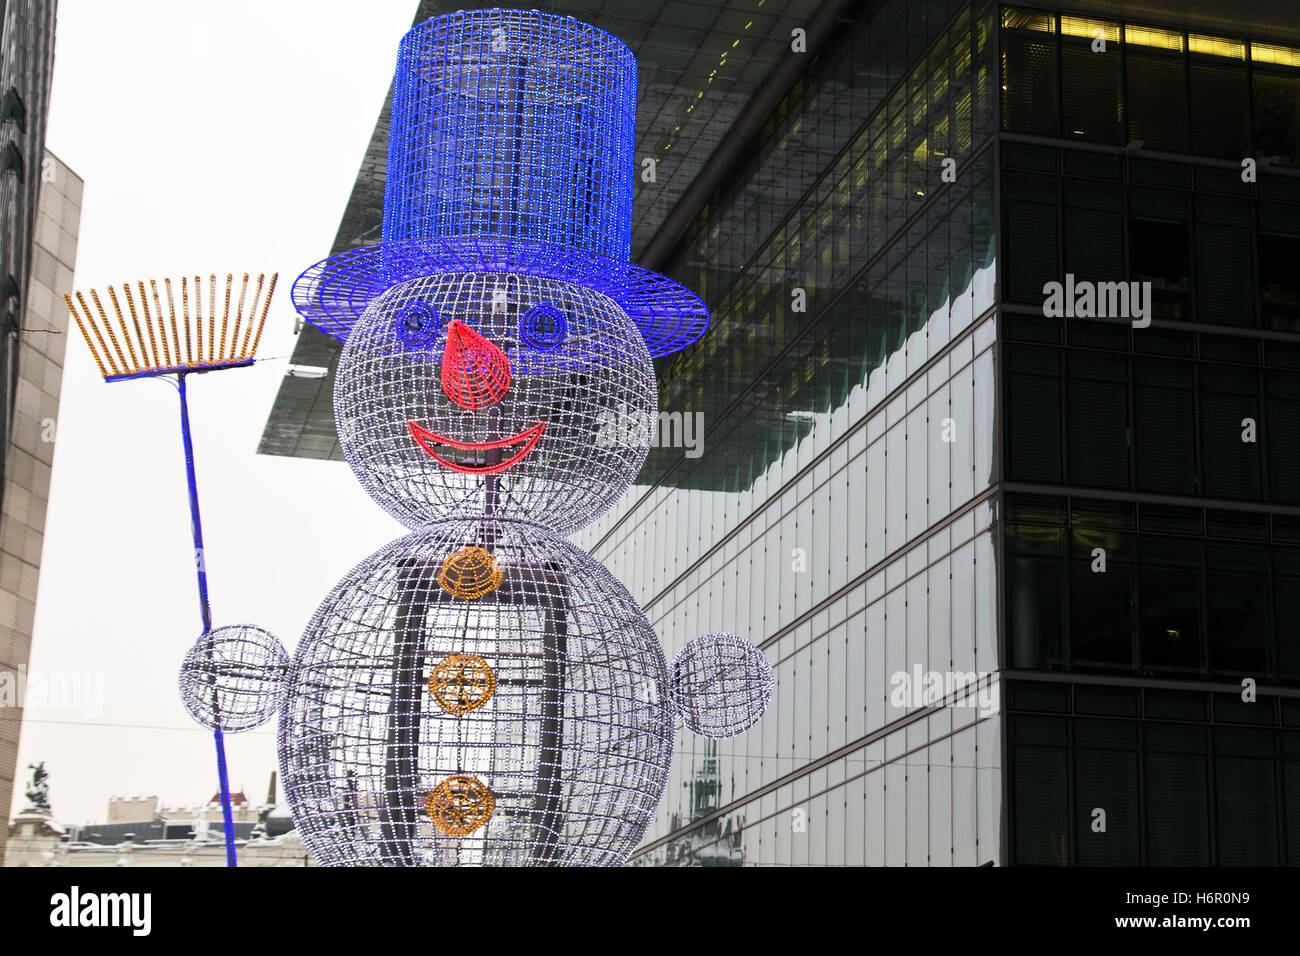 lighted snowman in berlin Stock Photo